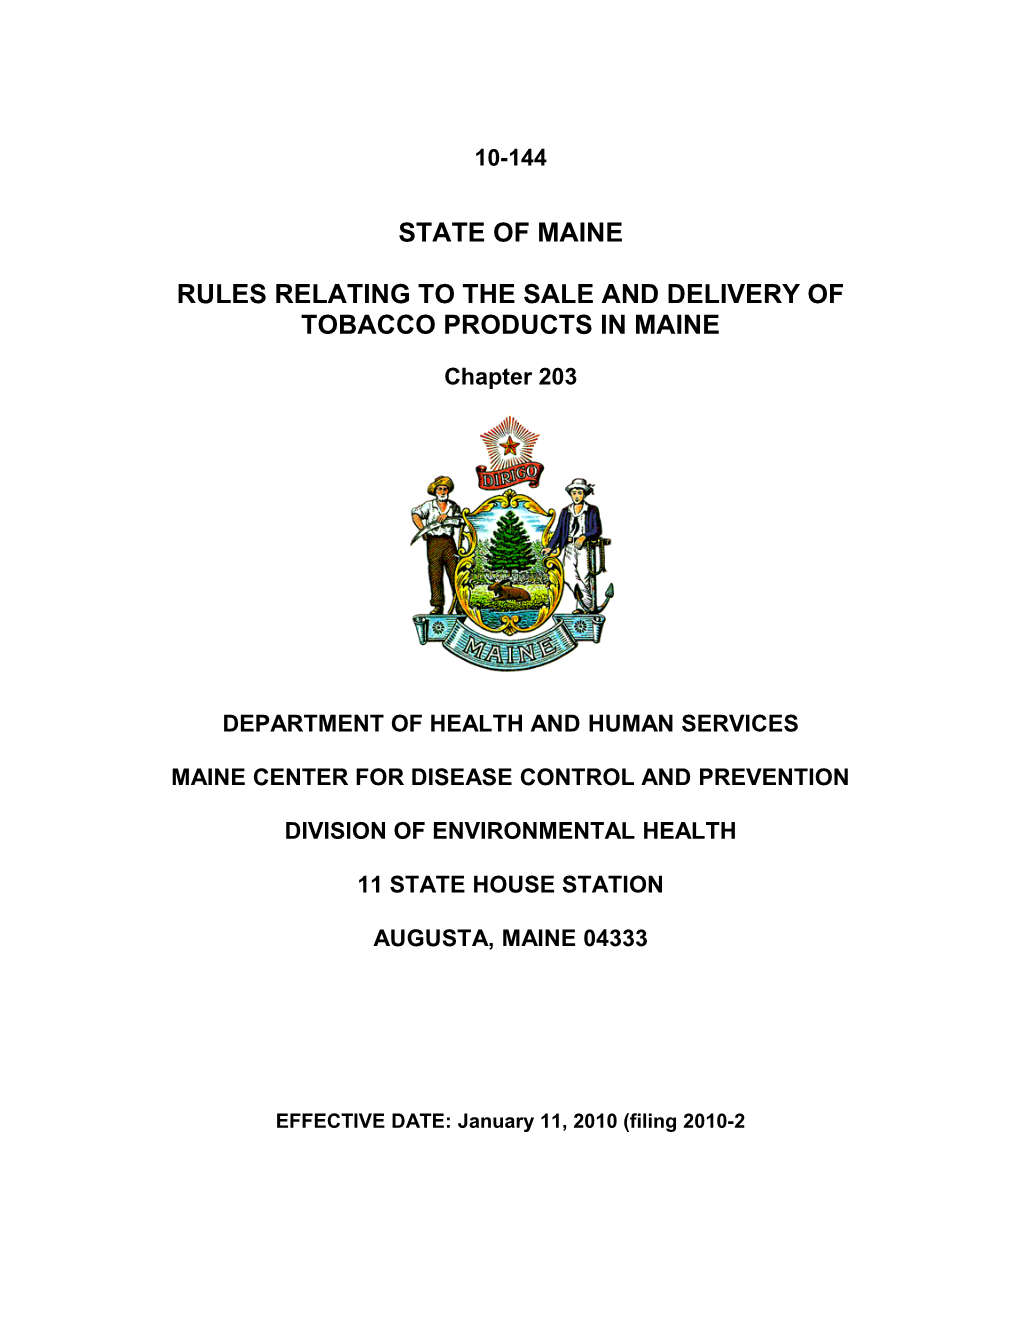 Rules Relating to the Sale and Delivery of Tobacco Products in Maine